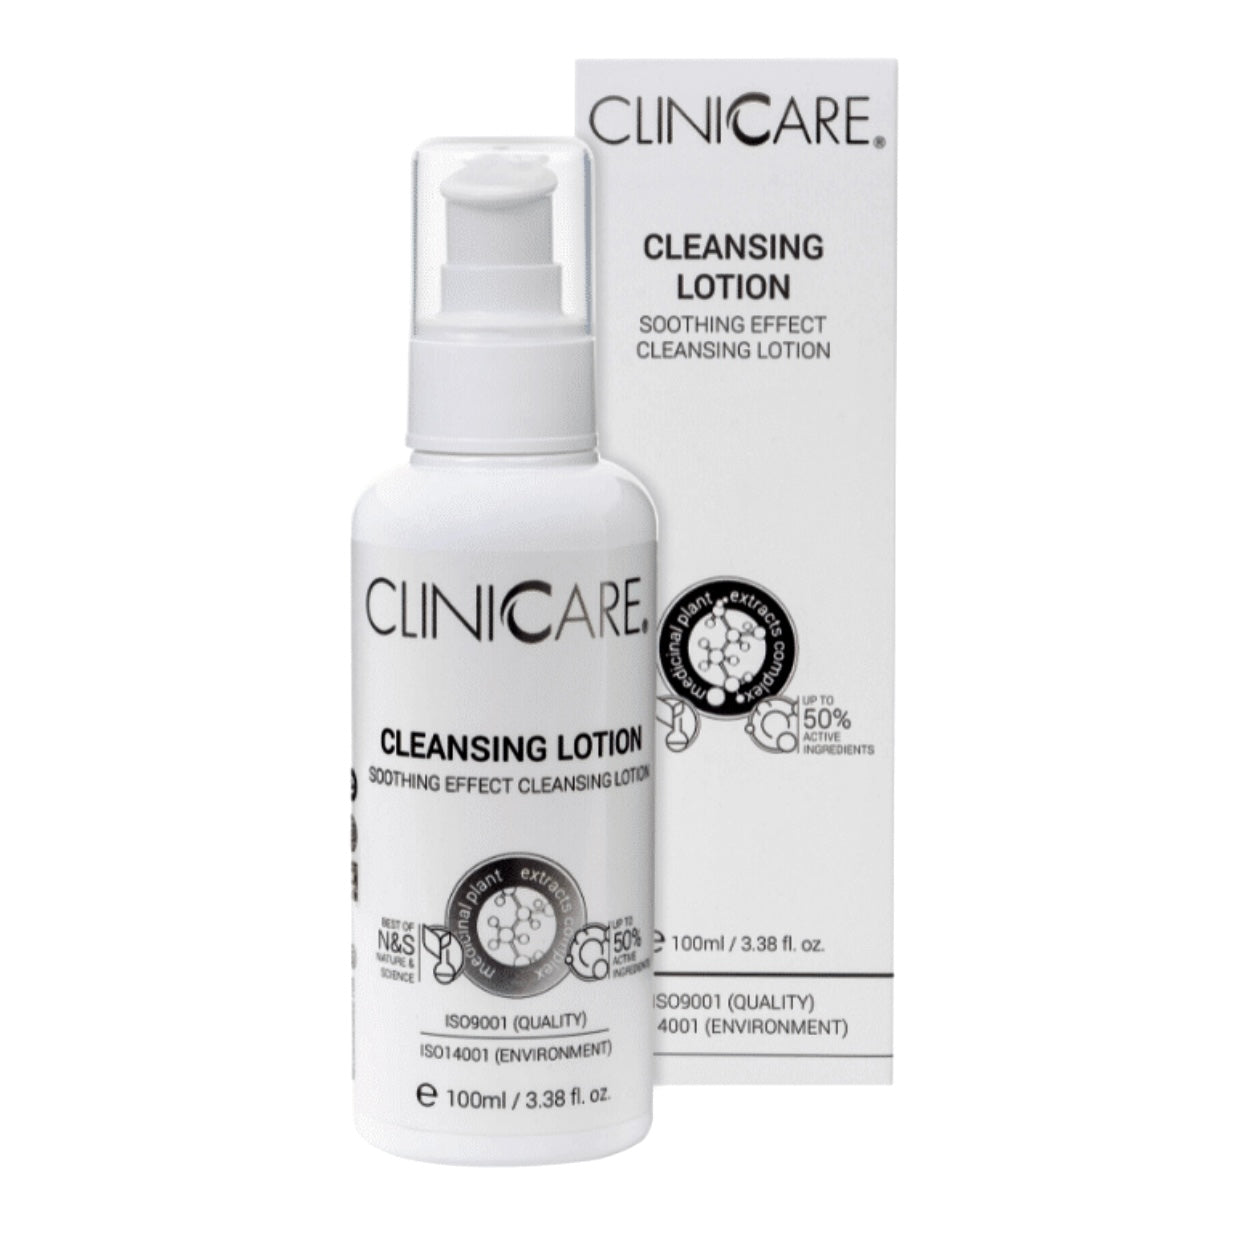 CLINICCARE Cleansing Lotion 100ml vegan